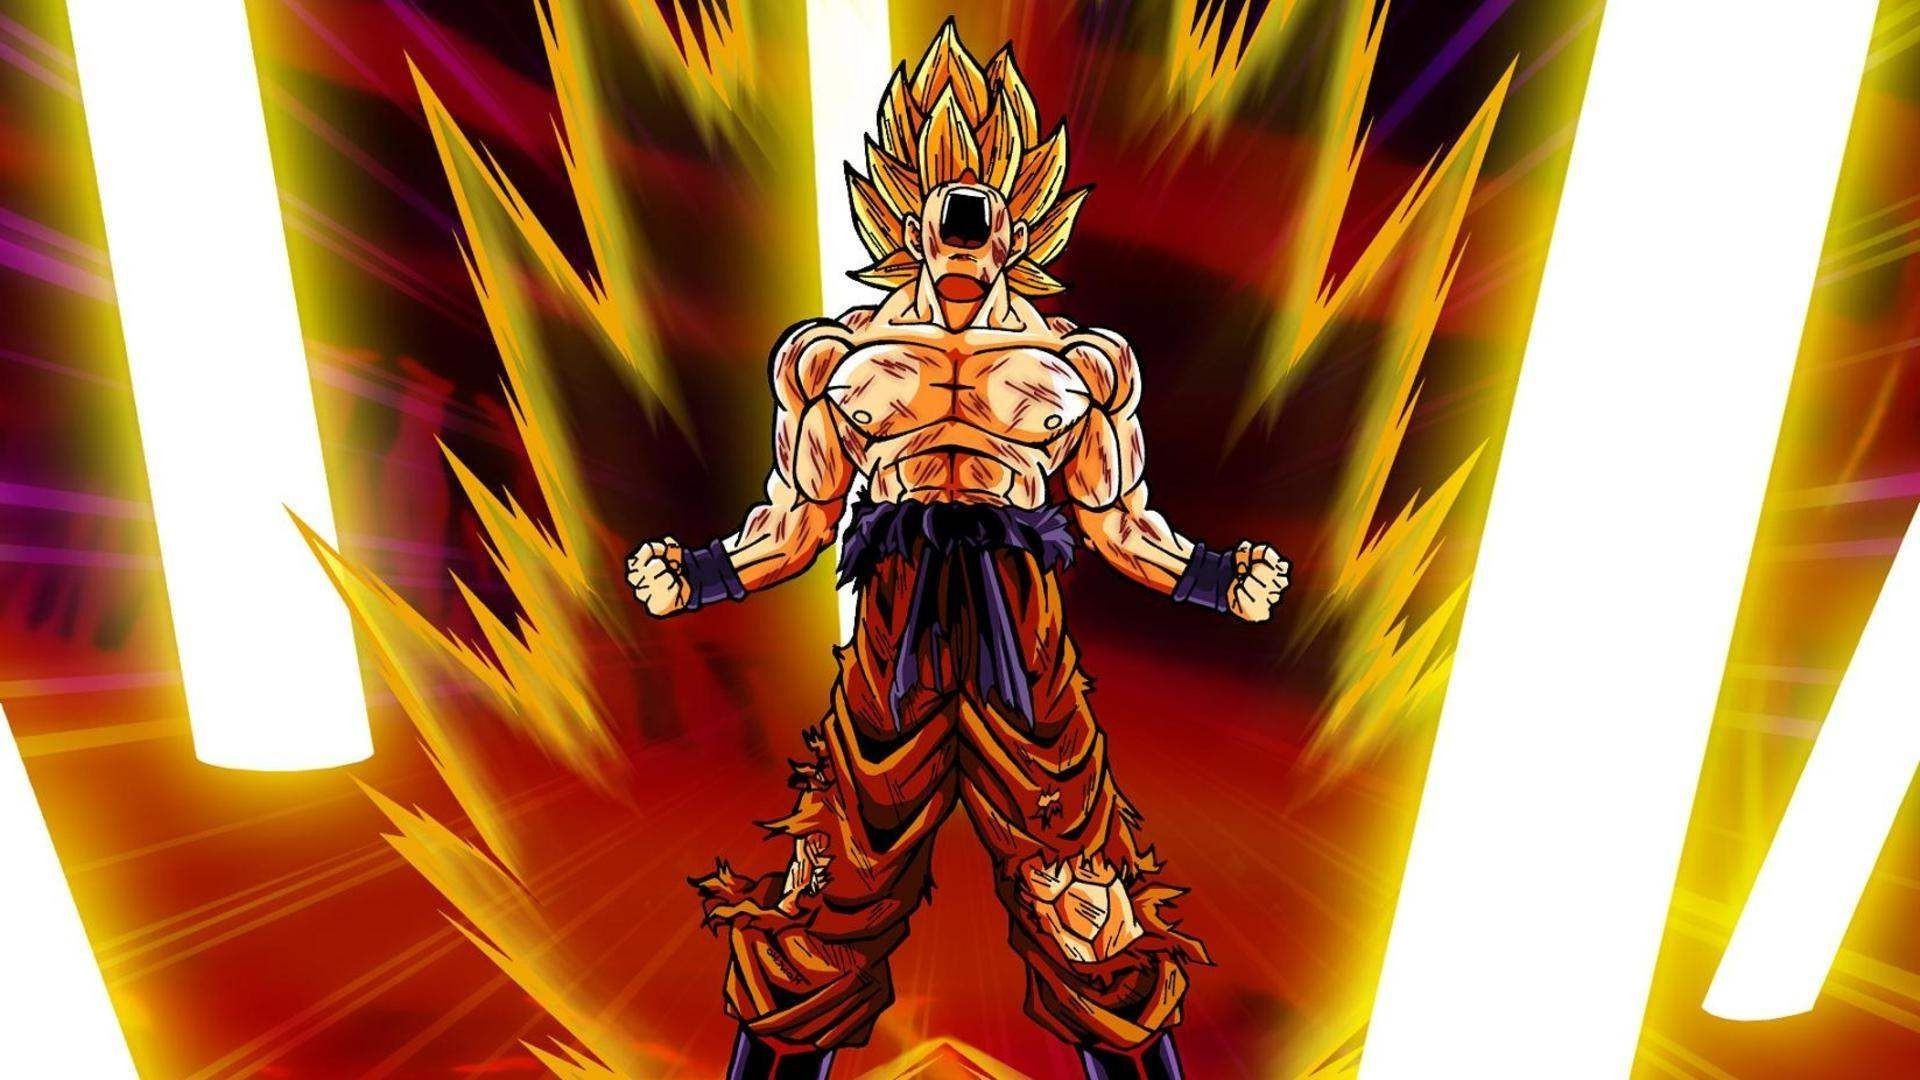 Goku Super Saiyan HD Backgrounds with image resolution 1920x1080 pixel. You can make this wallpaper for your Desktop Computer Backgrounds, Mac Wallpapers, Android Lock screen or iPhone Screensavers